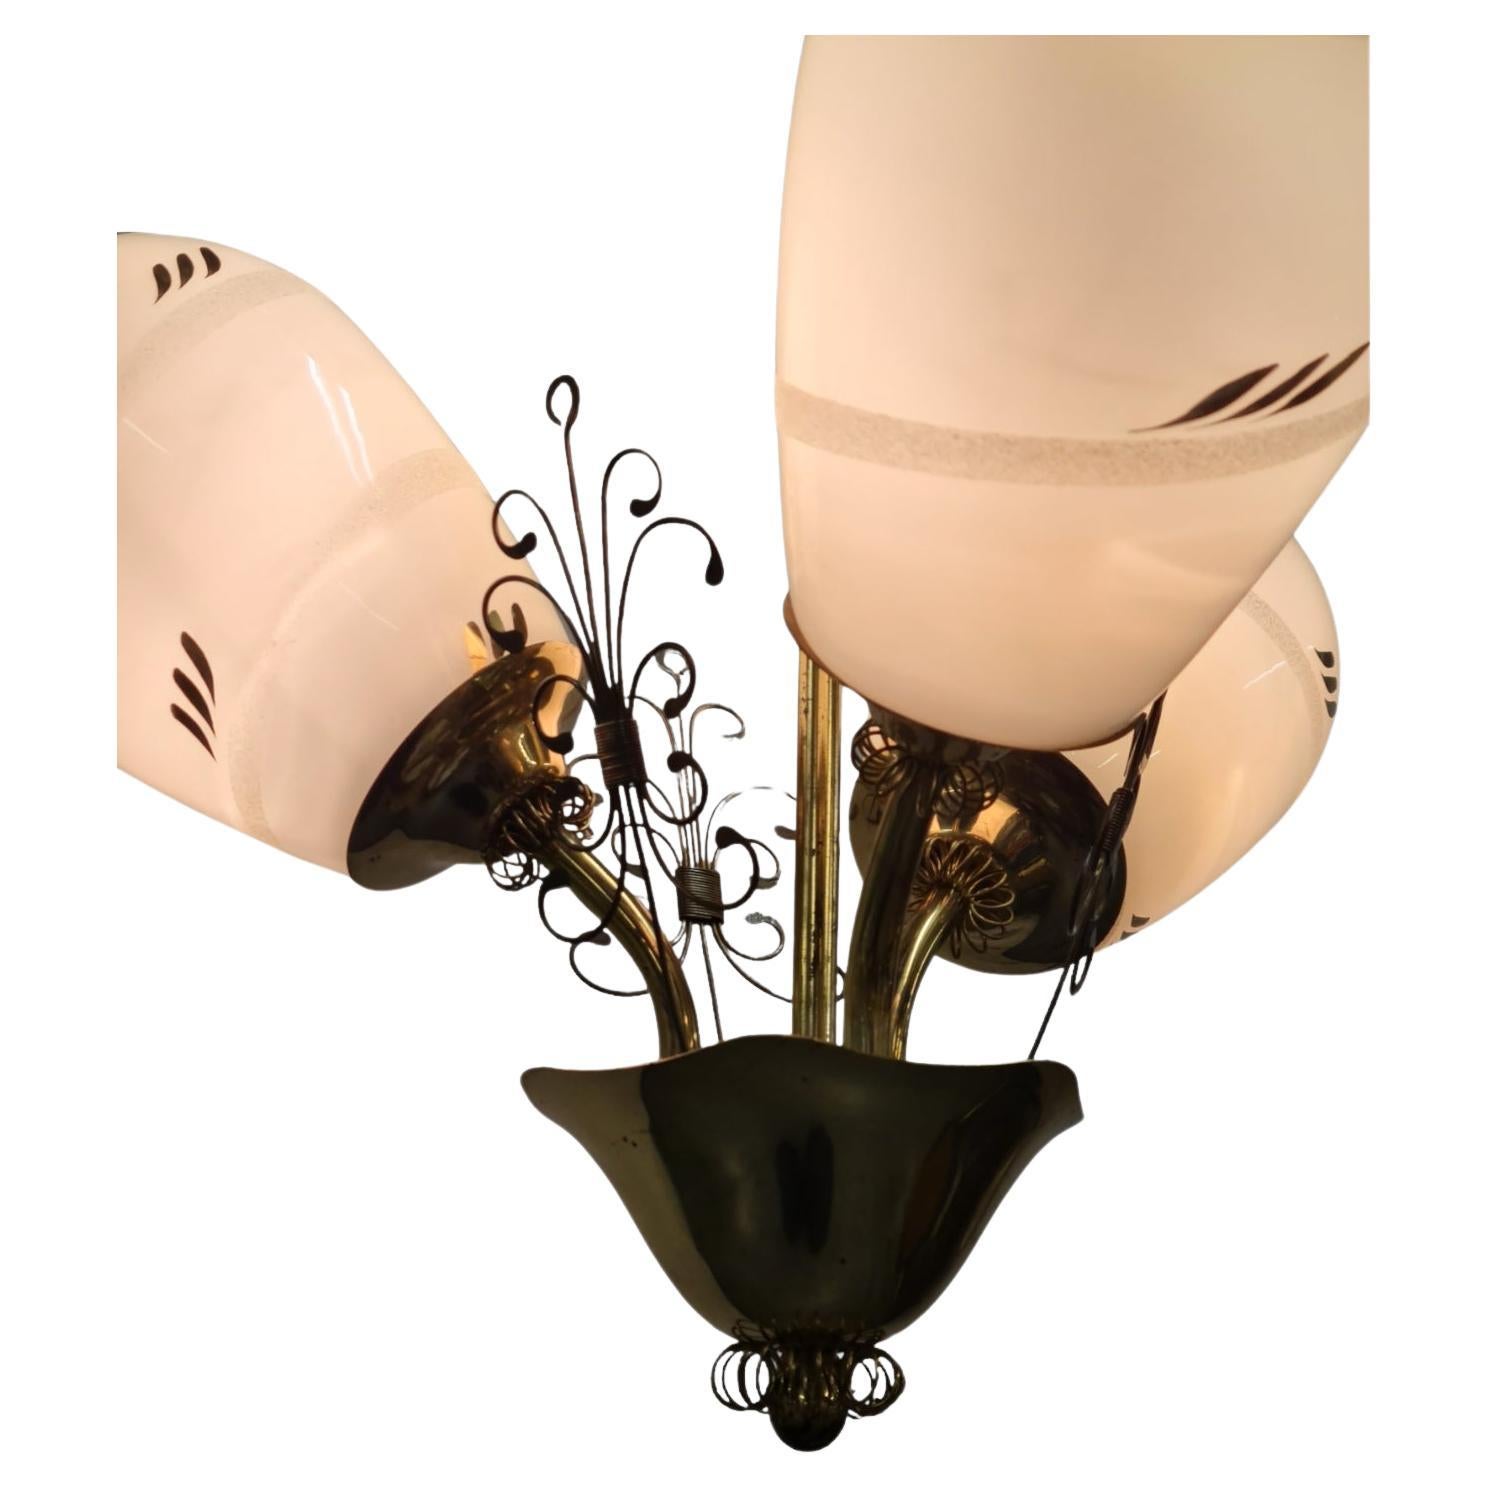 This is quite a typical 1950s Finnish design ceiling lamp at its best. Of course there are striking similarities to Paavo Tynell lighting fixtures, but not everyone could afford Tynells, even back then.
There are quite a few similar lamps in the